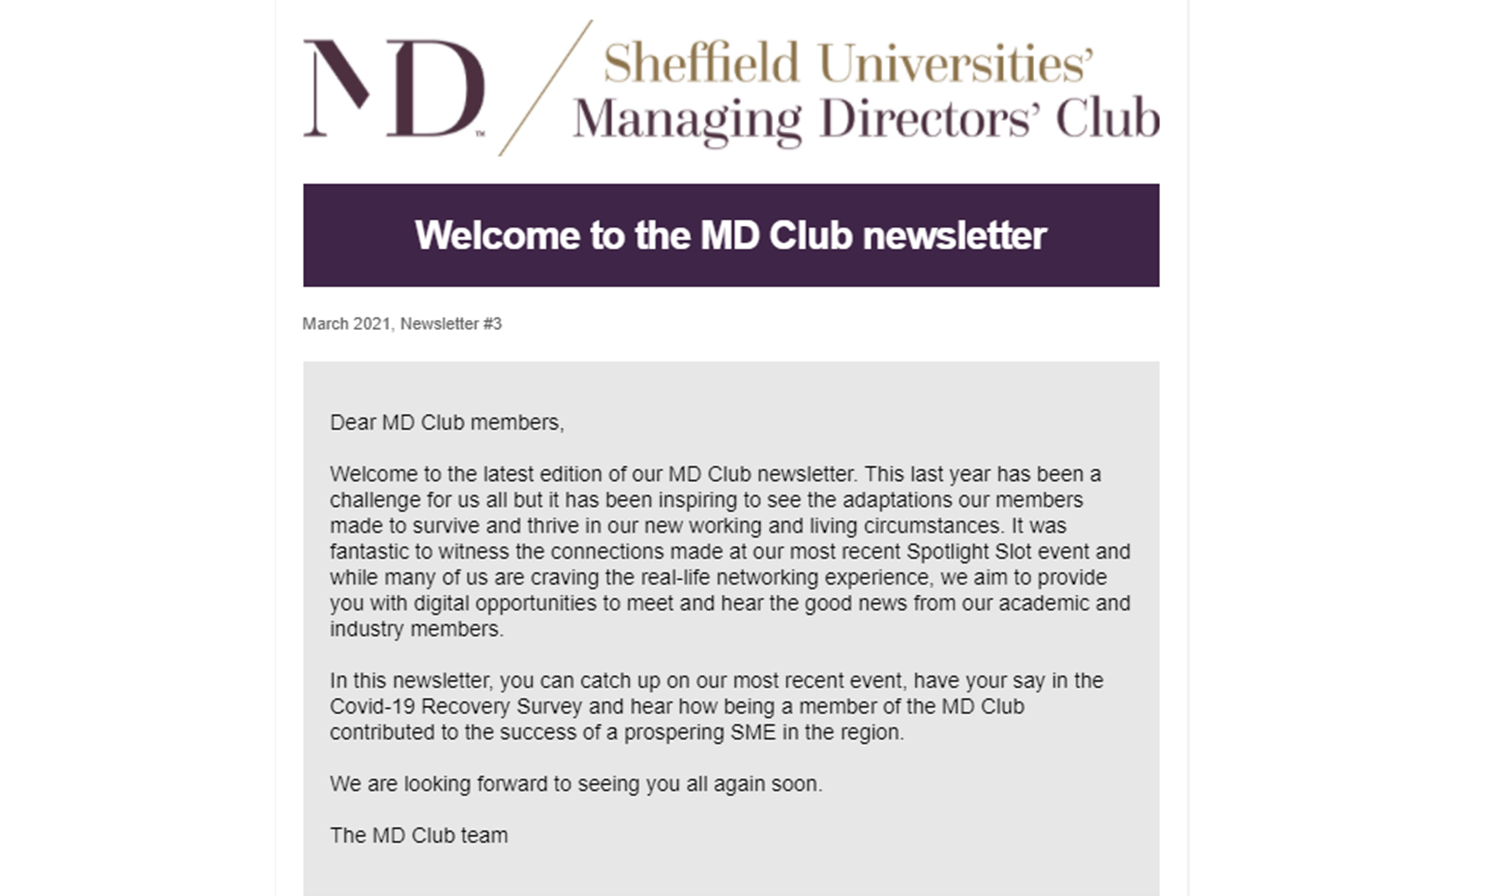 Newsletter #3 – Catch up on the latest MD Club news